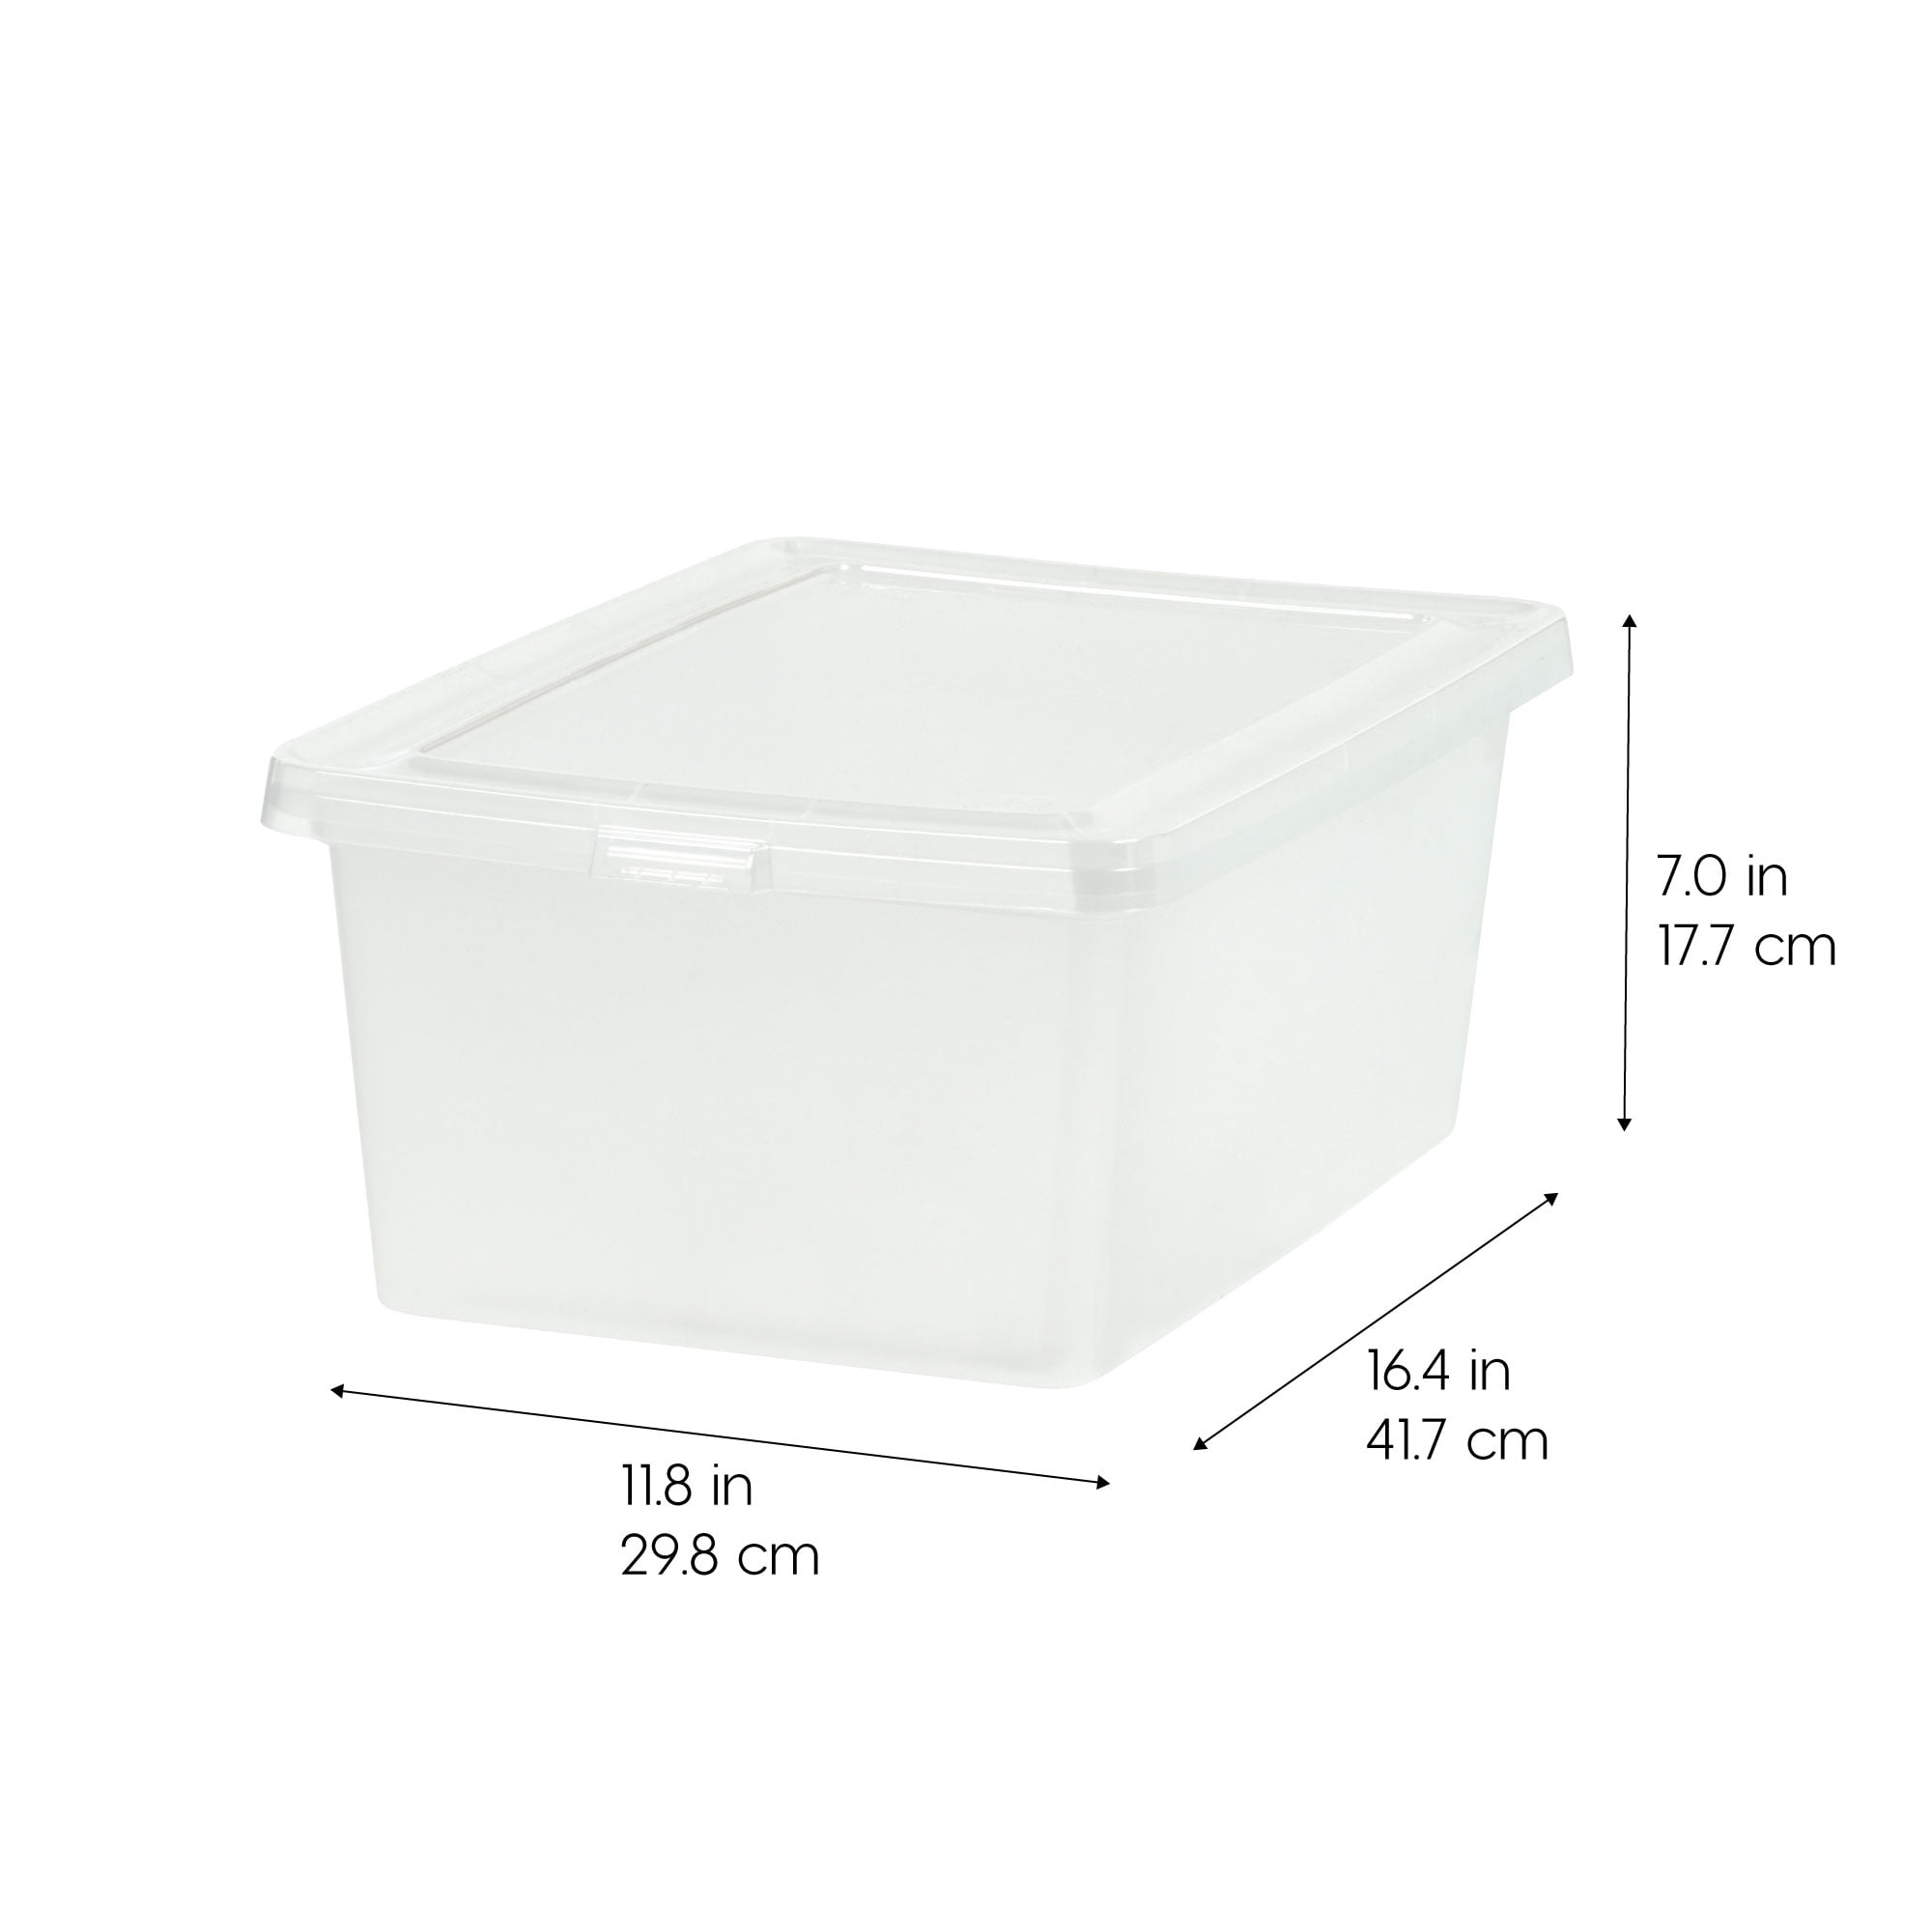  IRIS USA 24.5 Qt Plastic Stackable Storage Container Bin with  Latching Lid, 4 Pack - Clear, Nestable Box Tote Closet Organization Toys  School Art Supplies Towels Blankets Comforters Sleeping Bags